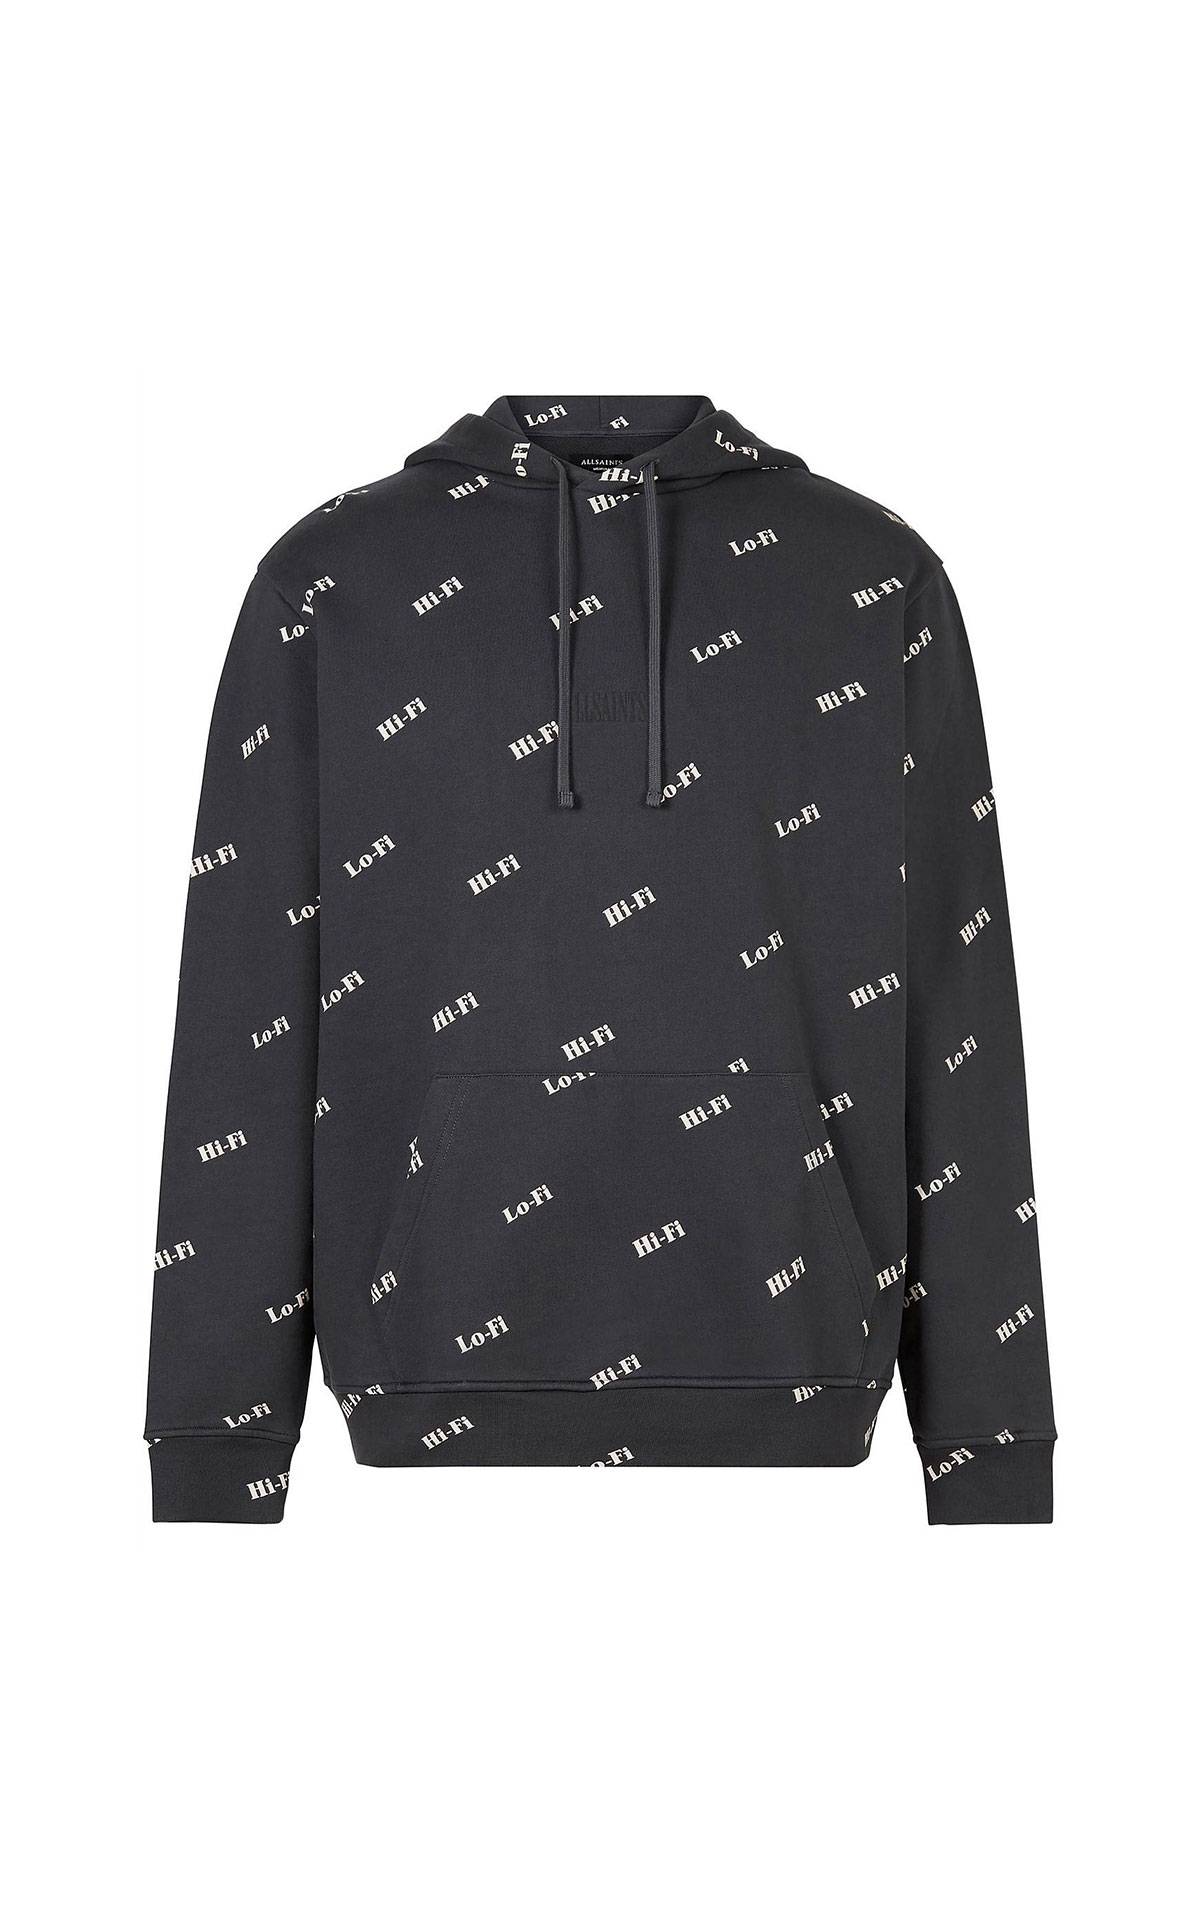 AllSaints Hi-Fi lo-fi Hoodie from Bicester Village